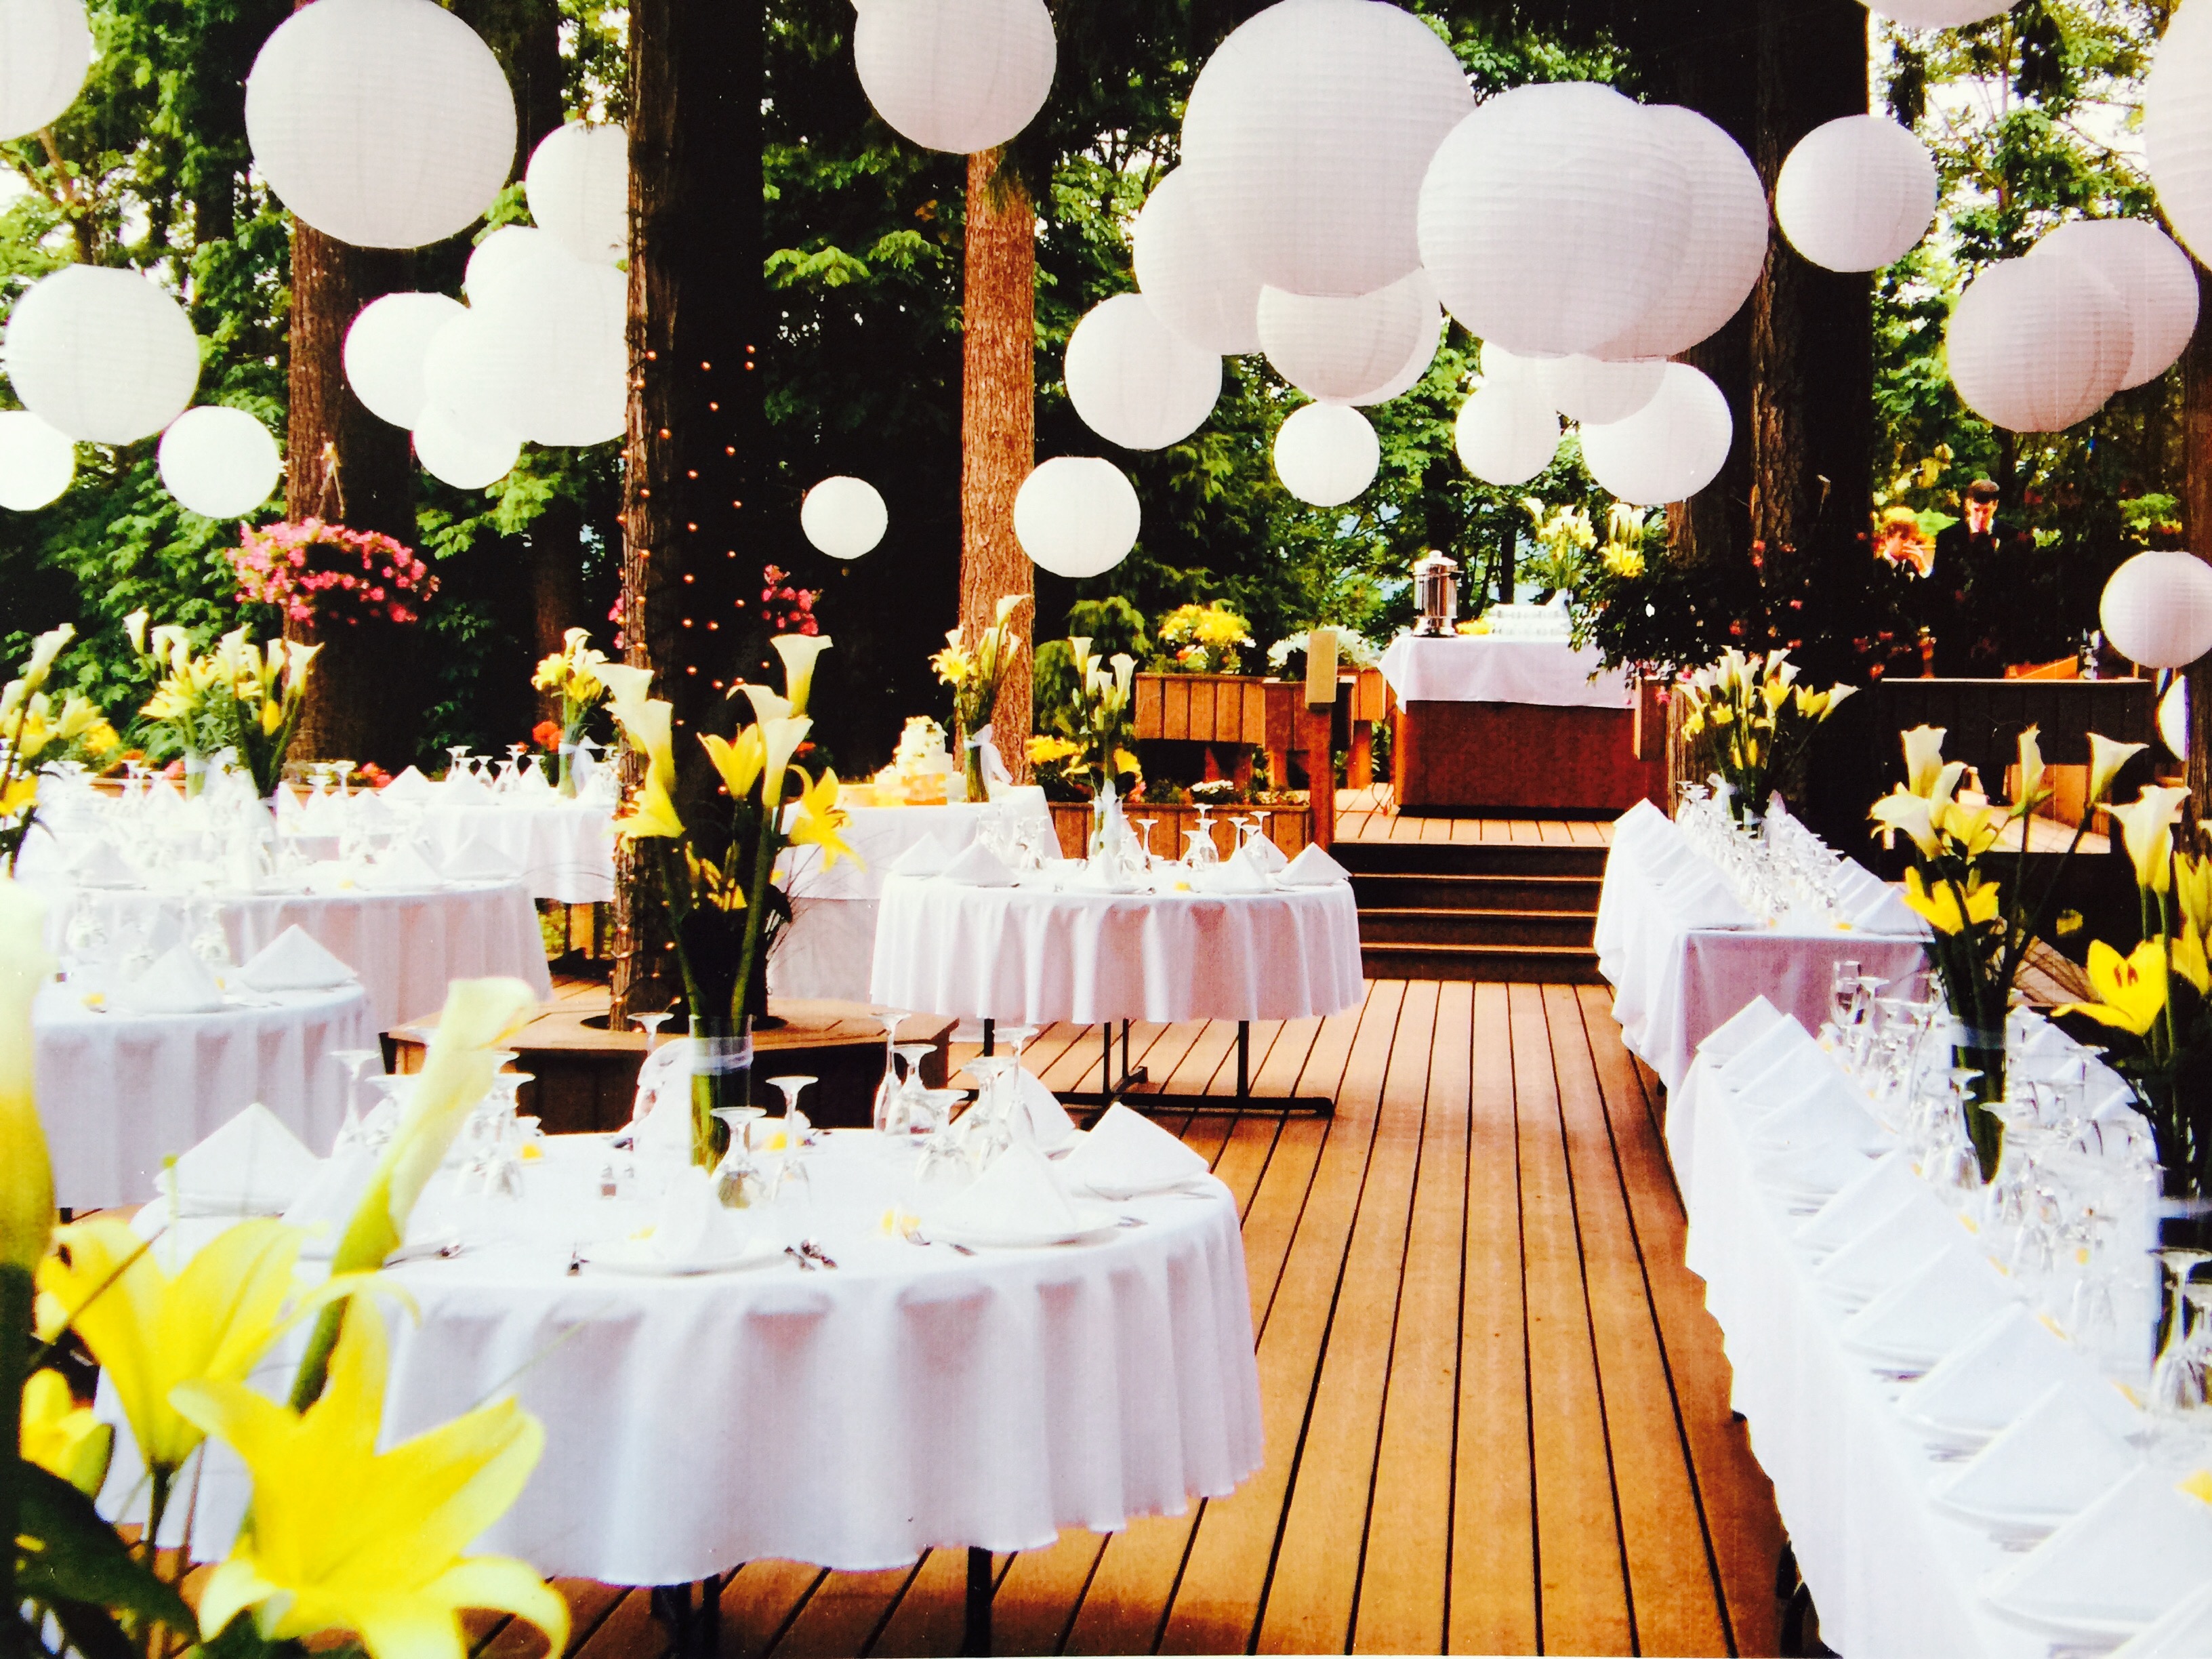 A wedding reception with white tables and paper lanterns.